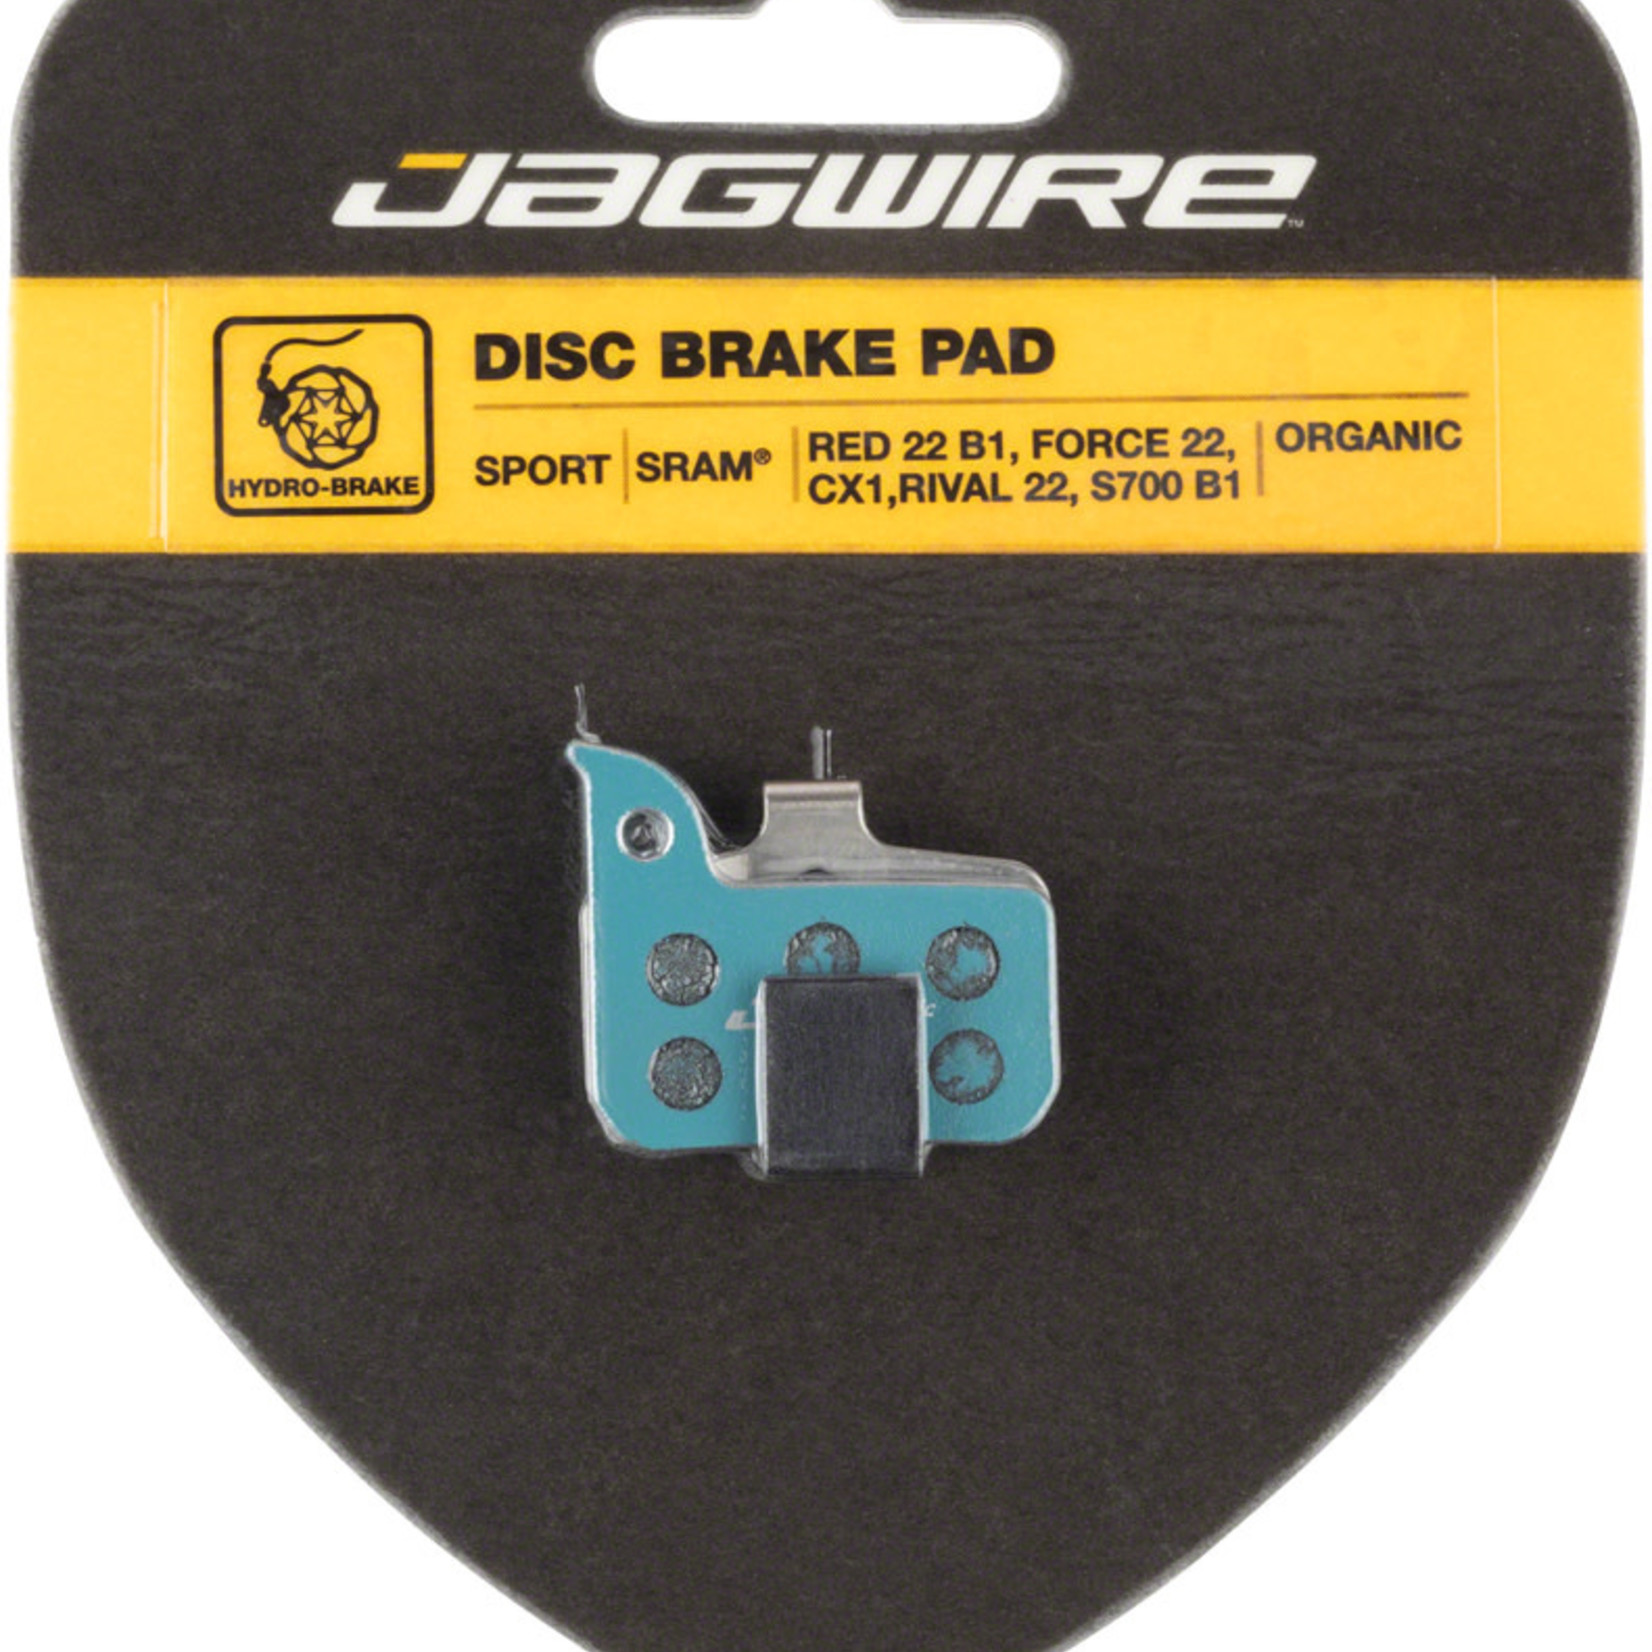 Jagwire Jagwire Sport Organic Disc Brake Pads for SRAM Red 22 B1, Force 22, CX1, Rival 22, S700 B1, Level Ultimate